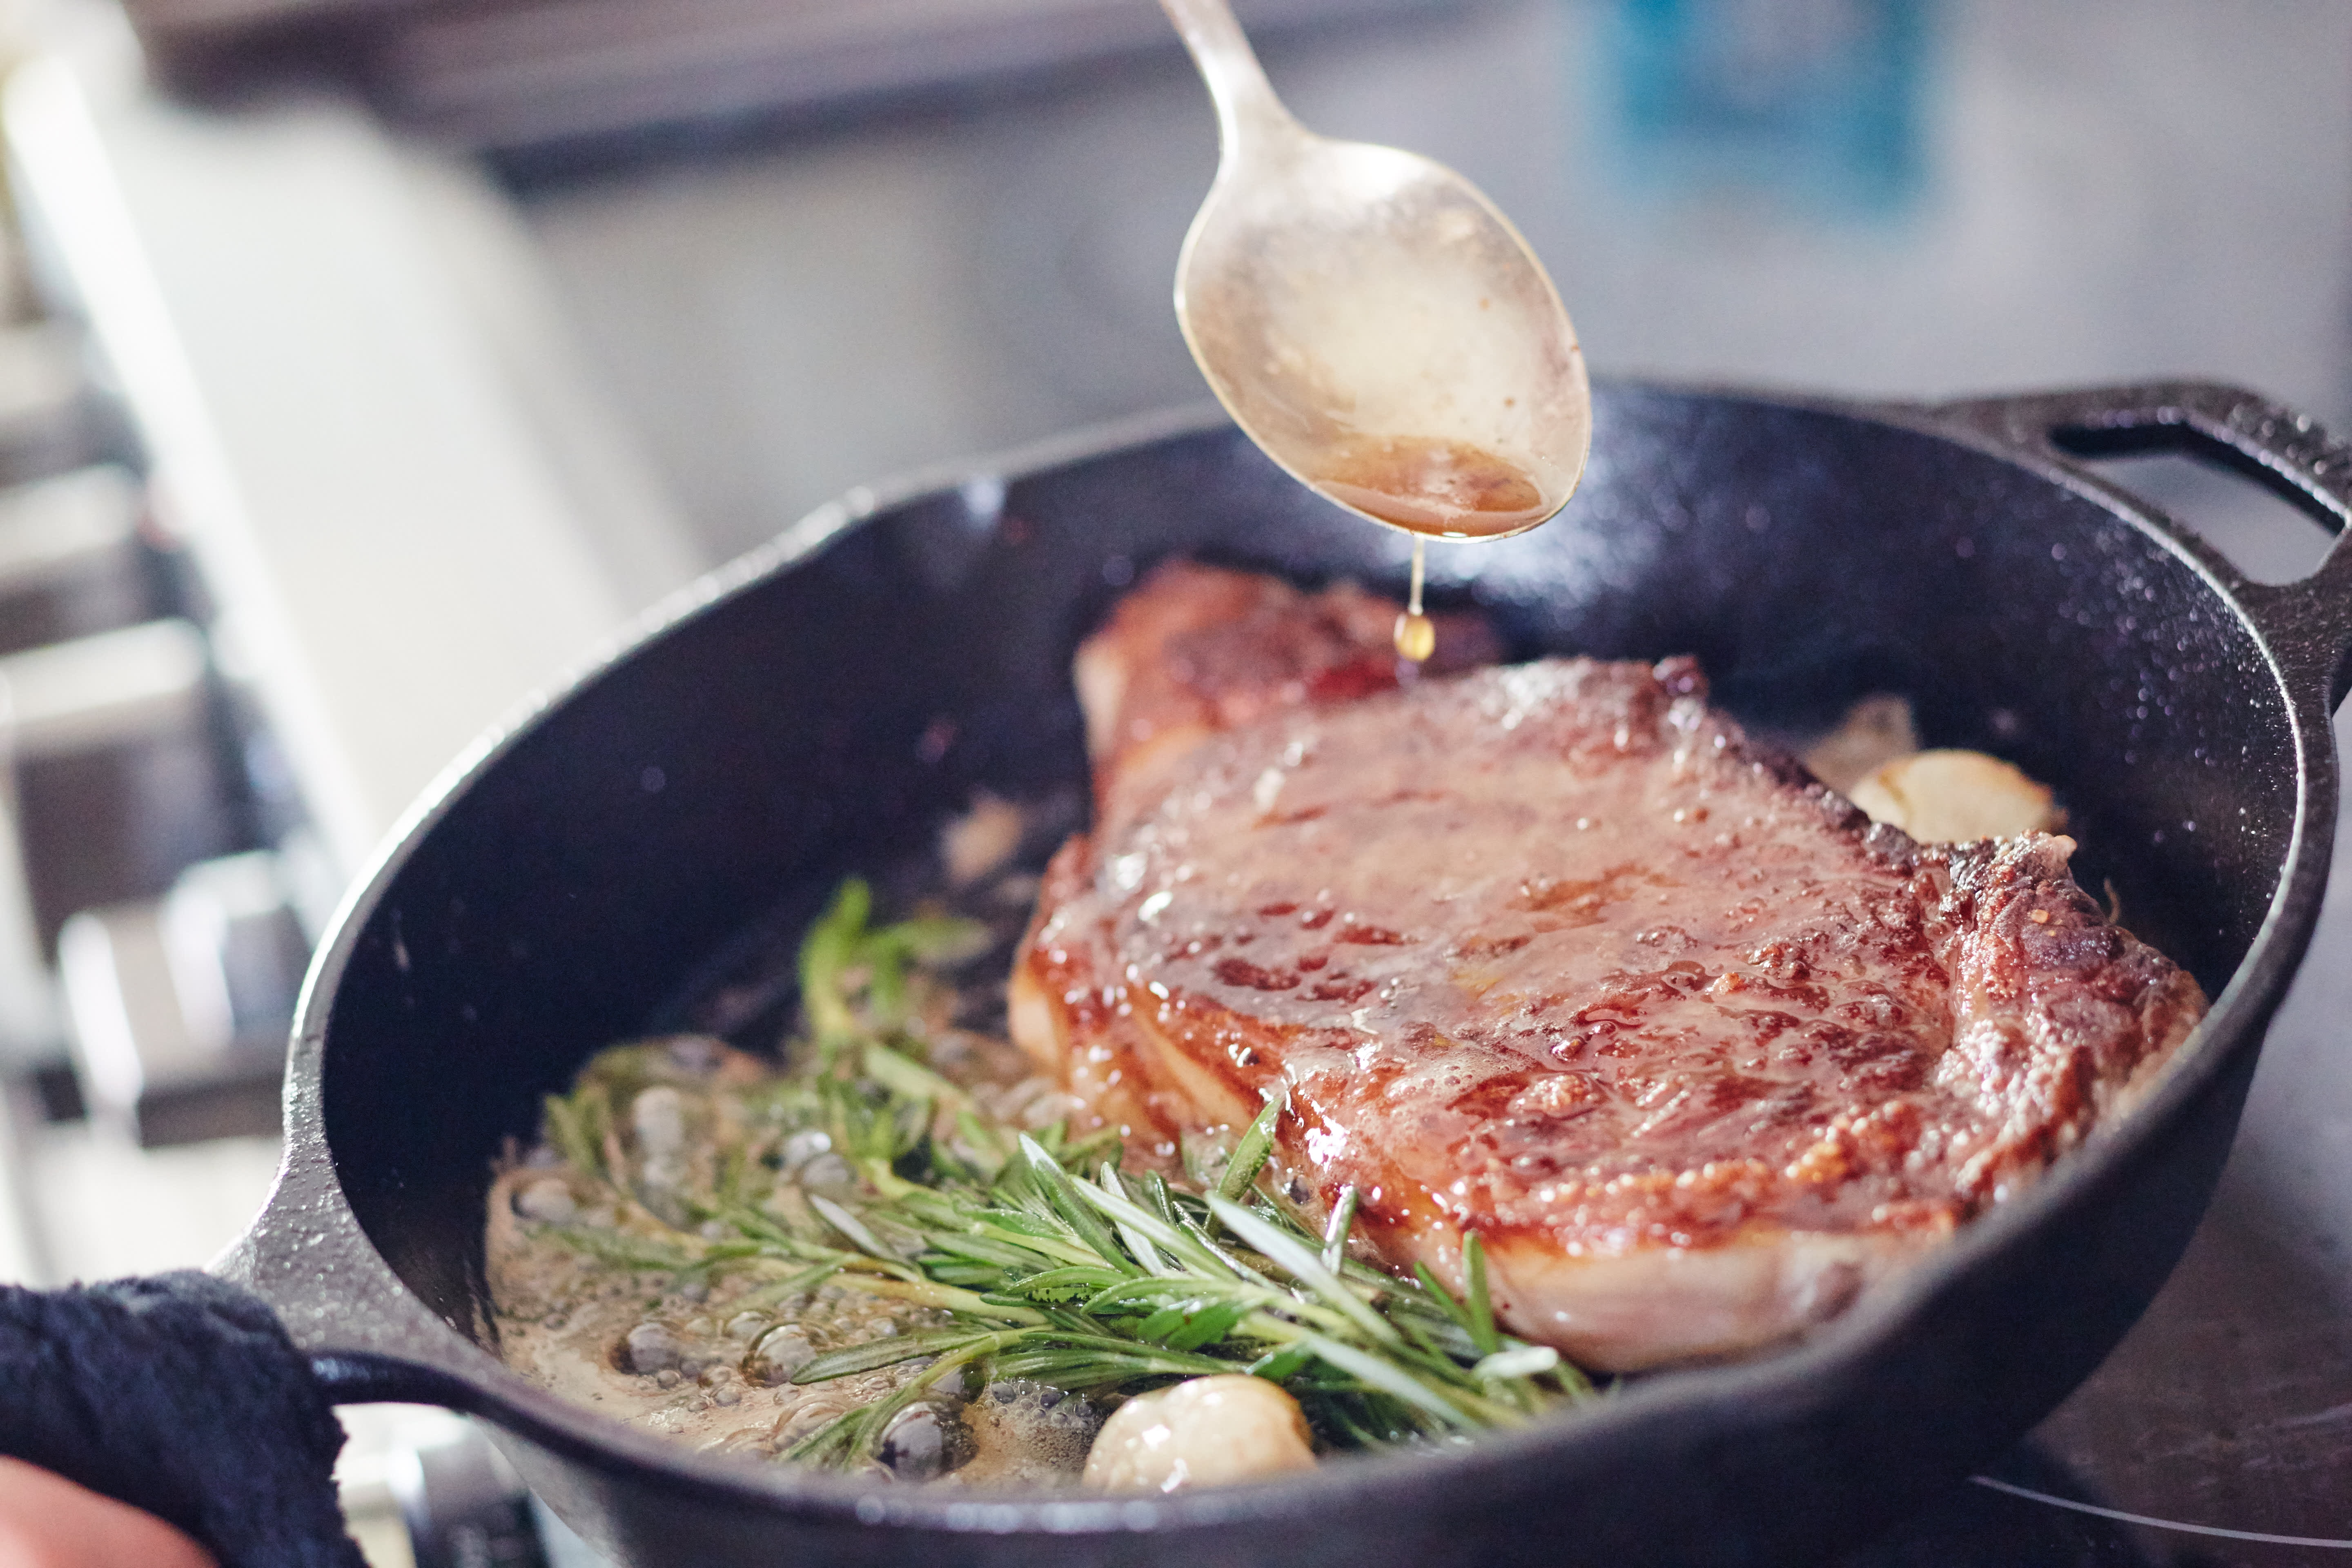 How To Make A Pan Sauce From Steak Drippings Kitchn